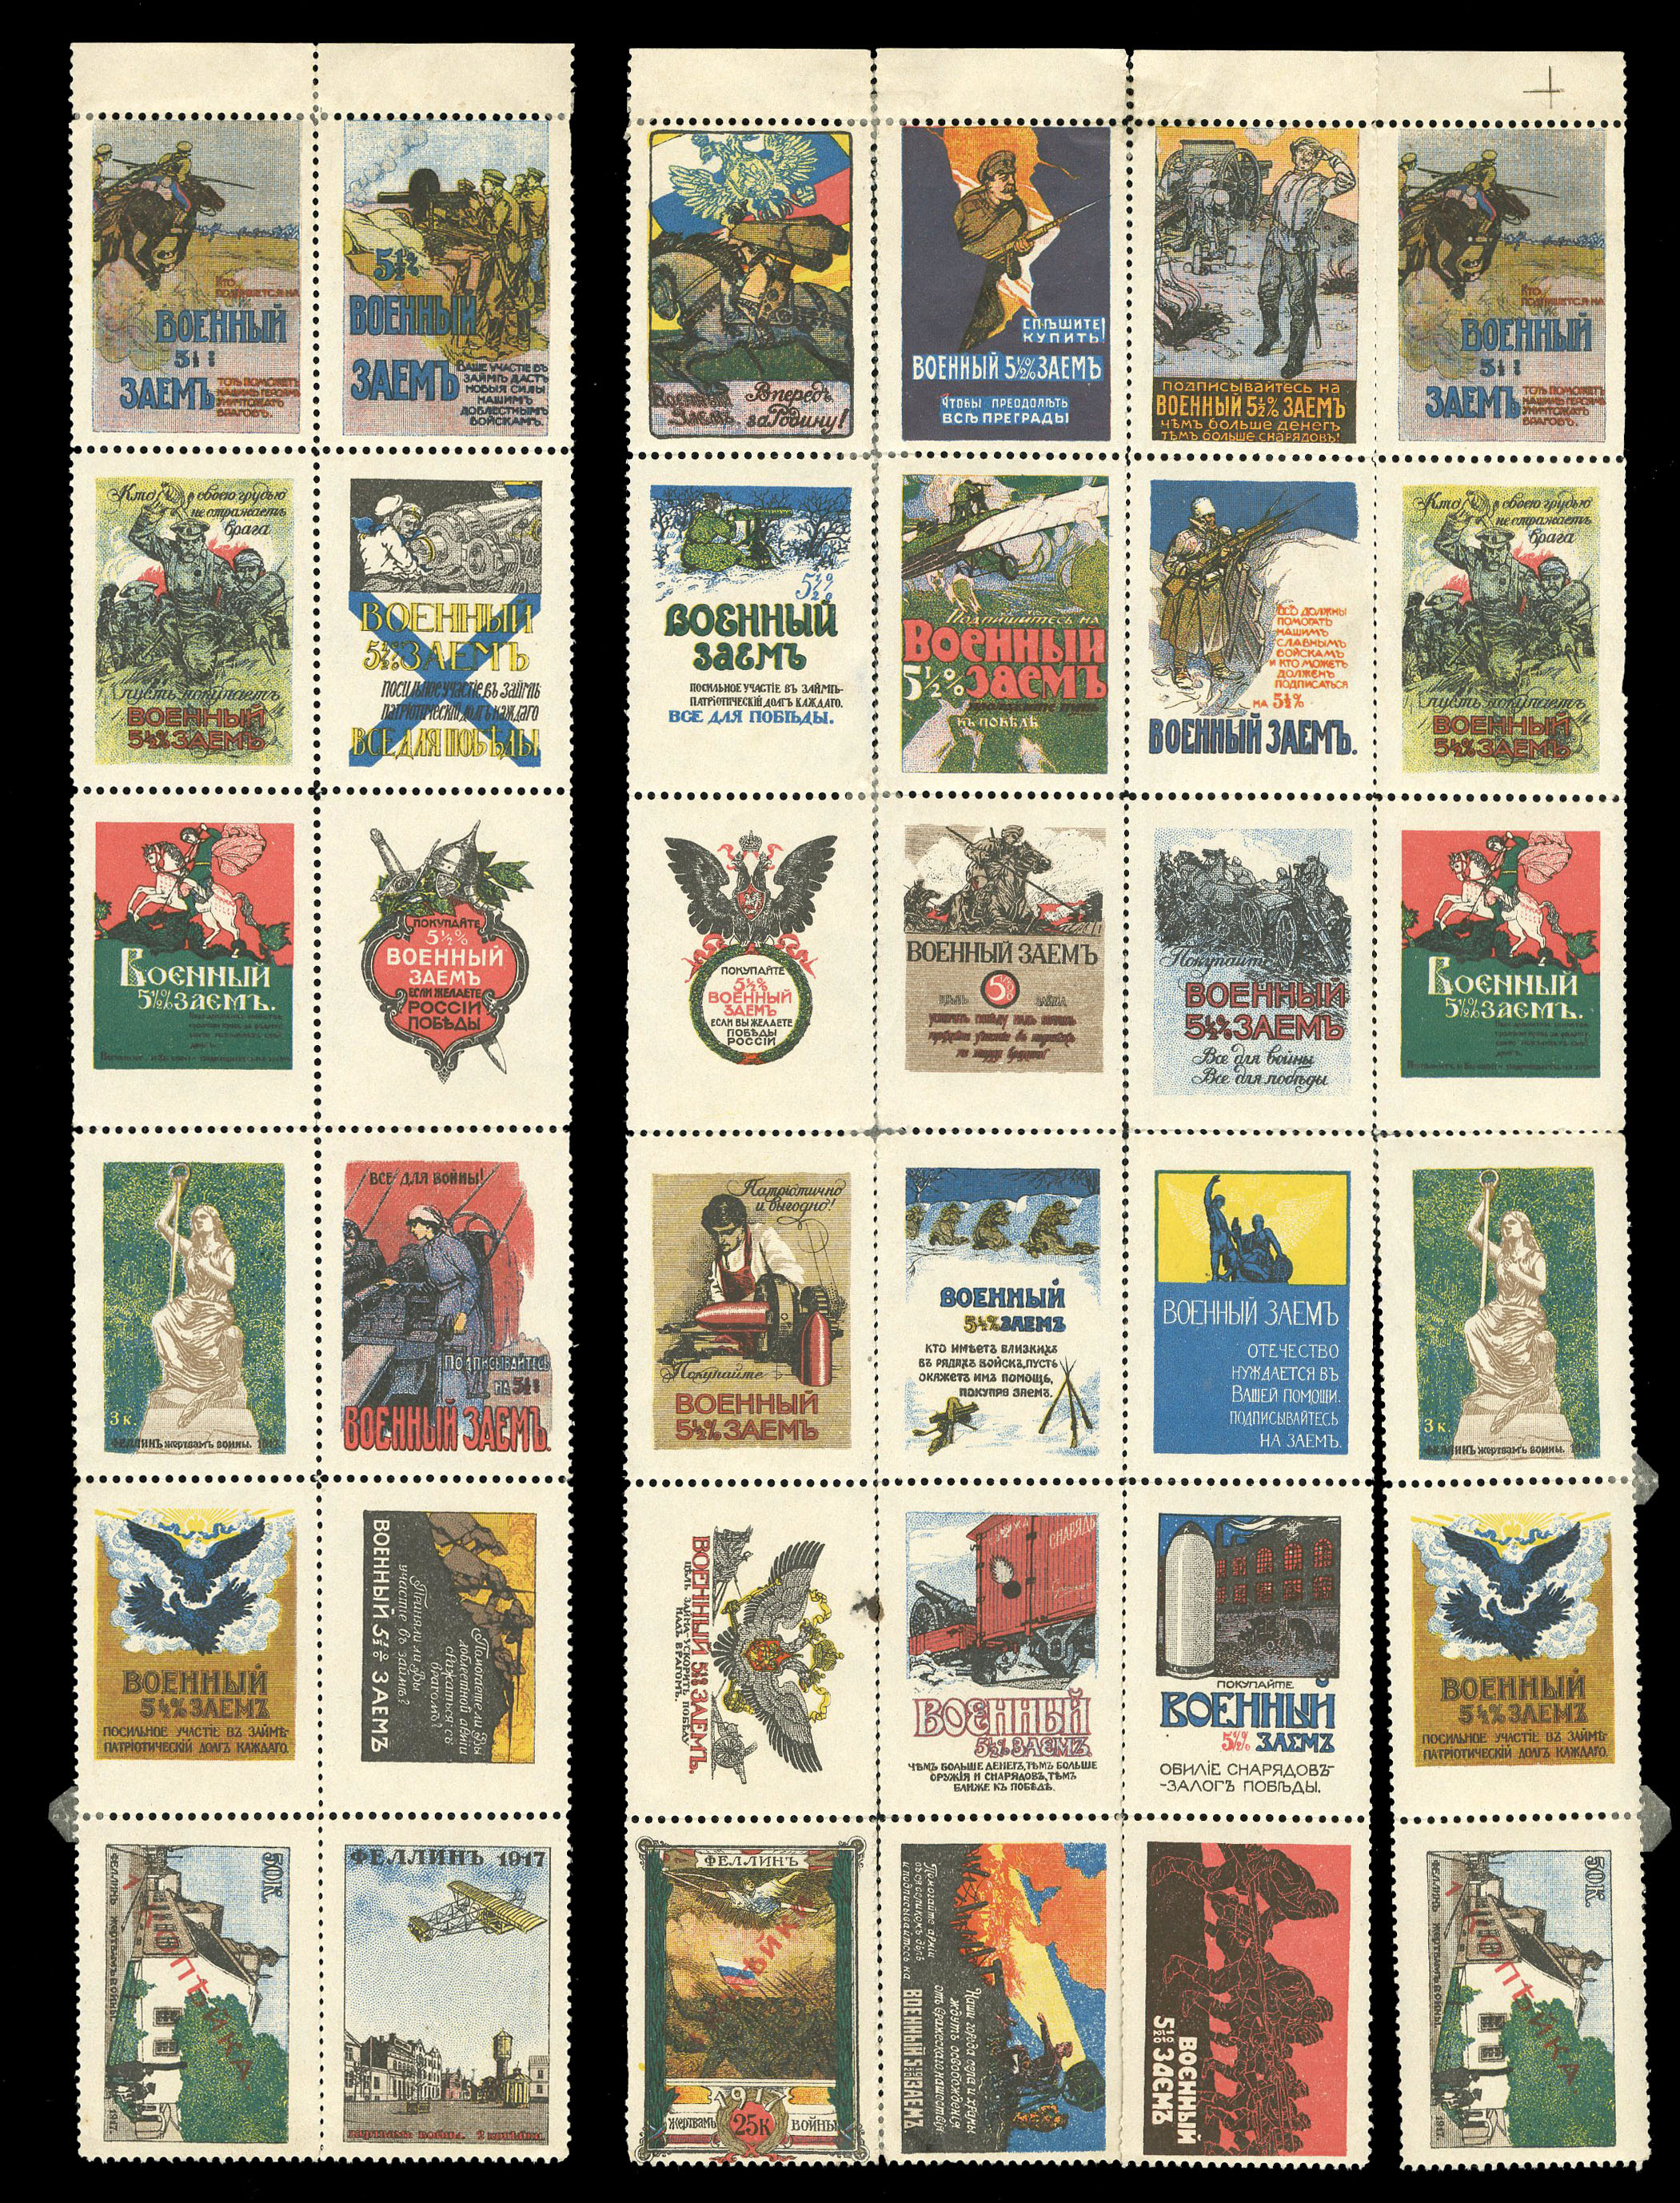 Lot 1217 - RUSSIA  Air Post Officials  -  Cherrystone Auctions U.S. & Worldwide Stamps & Postal History